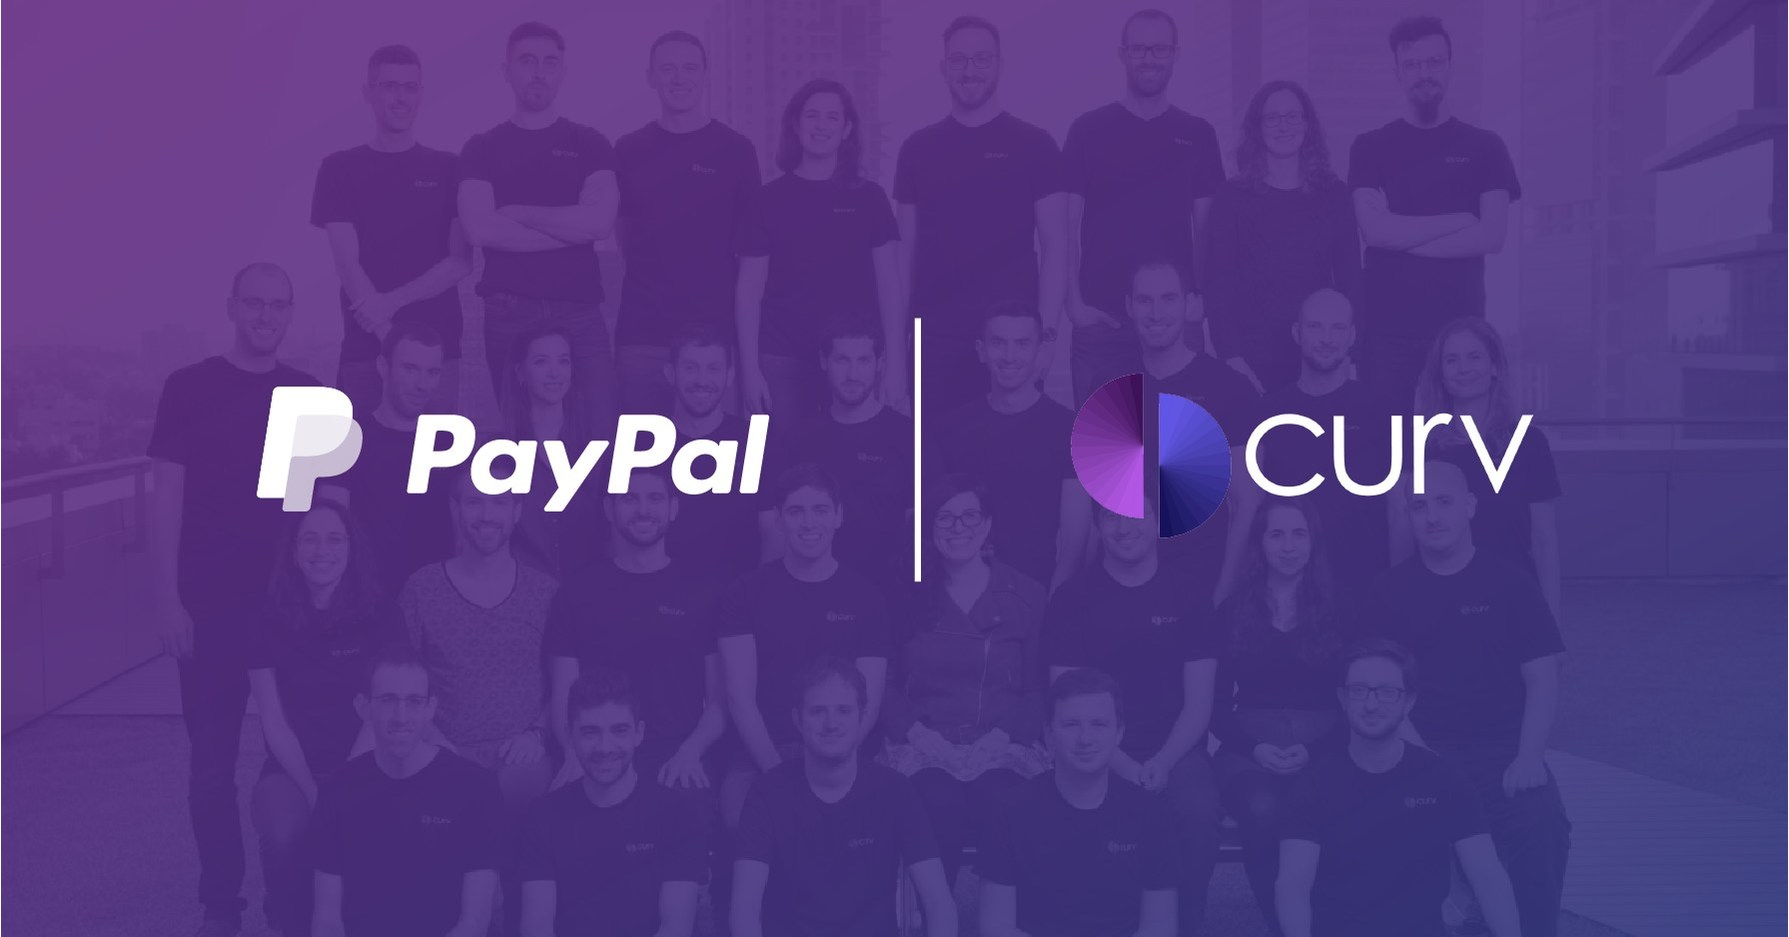 PayPal to purchase Curv